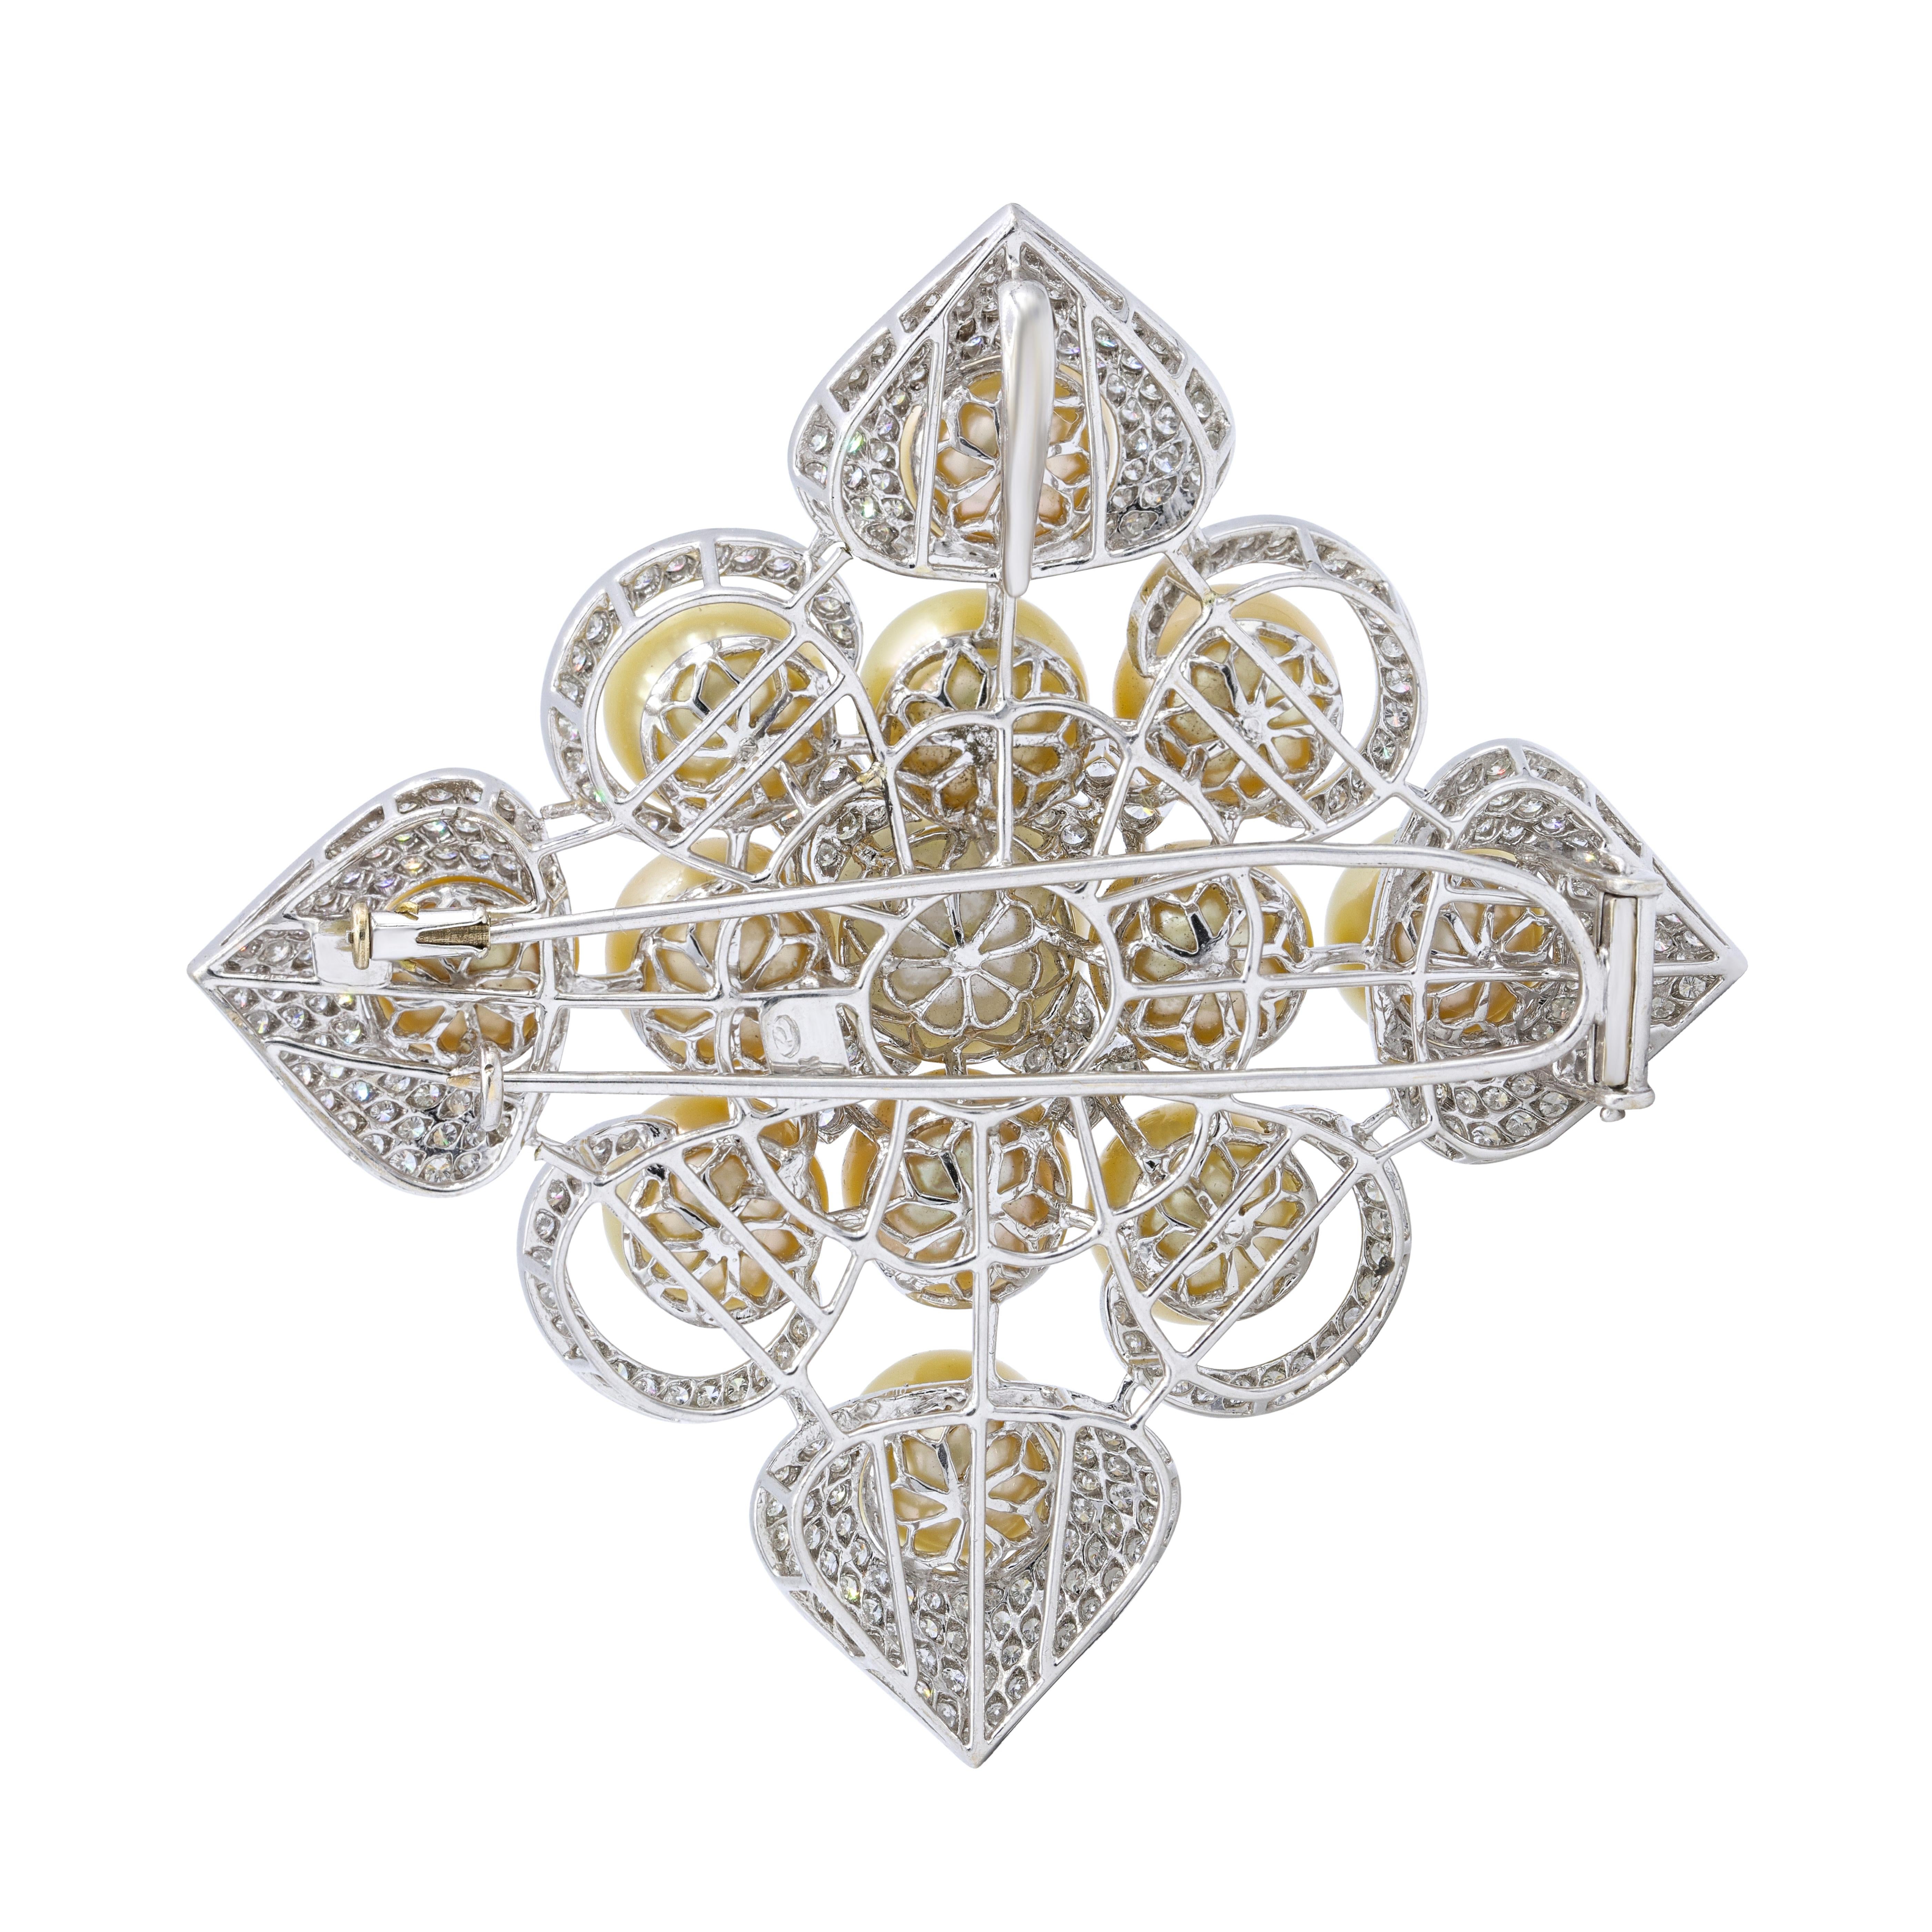 18K white gold pearls and diamonds brooch features 5.00 cts of diamonds and 1 white pearl in the middle and 12 champagne color pearls 11-14mm.